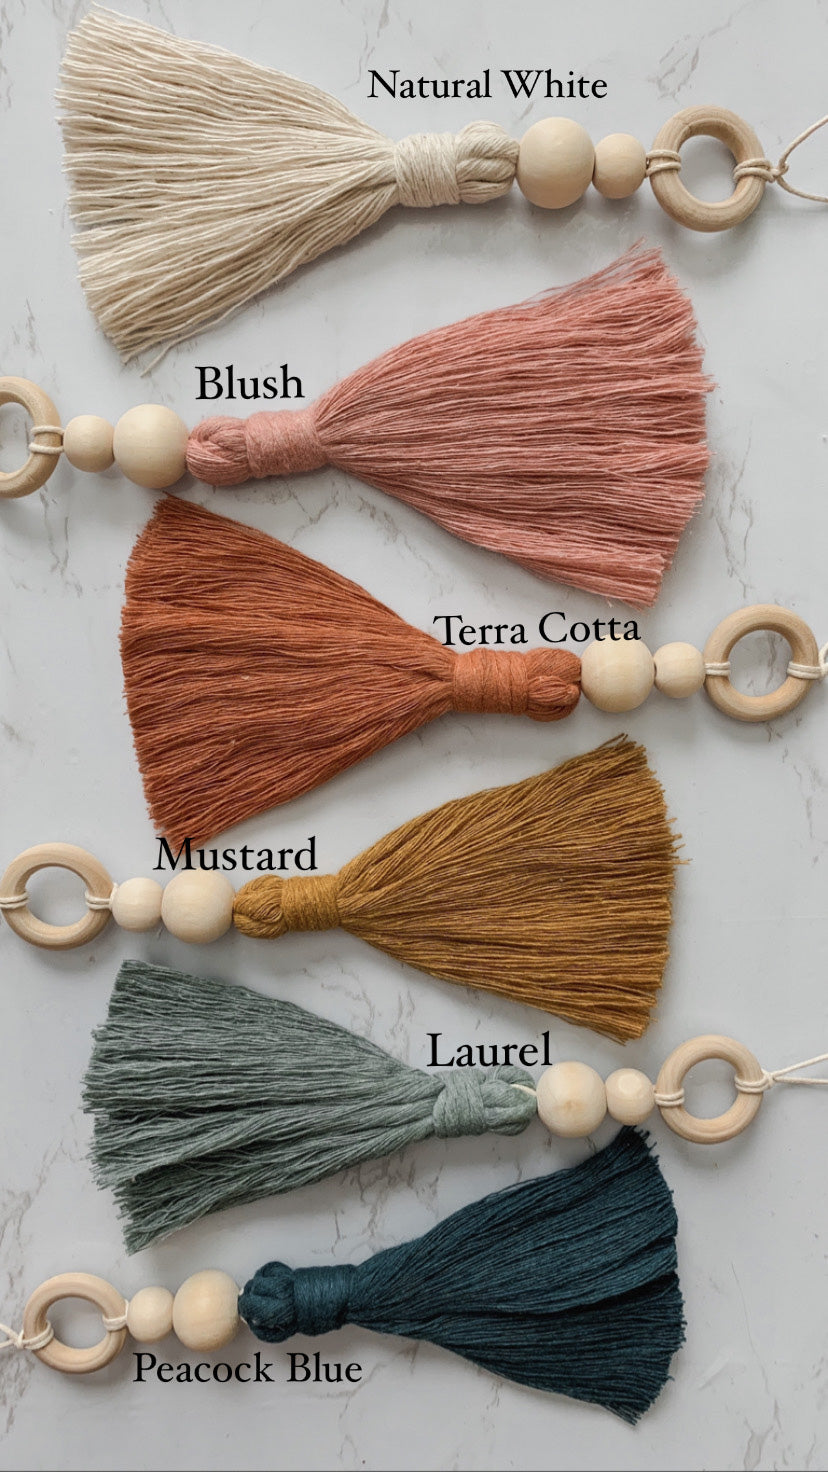 Six hanging tassel charms with wooden beading detail shown in white, blush, terra cotta, mustard, teal, and blue colors 